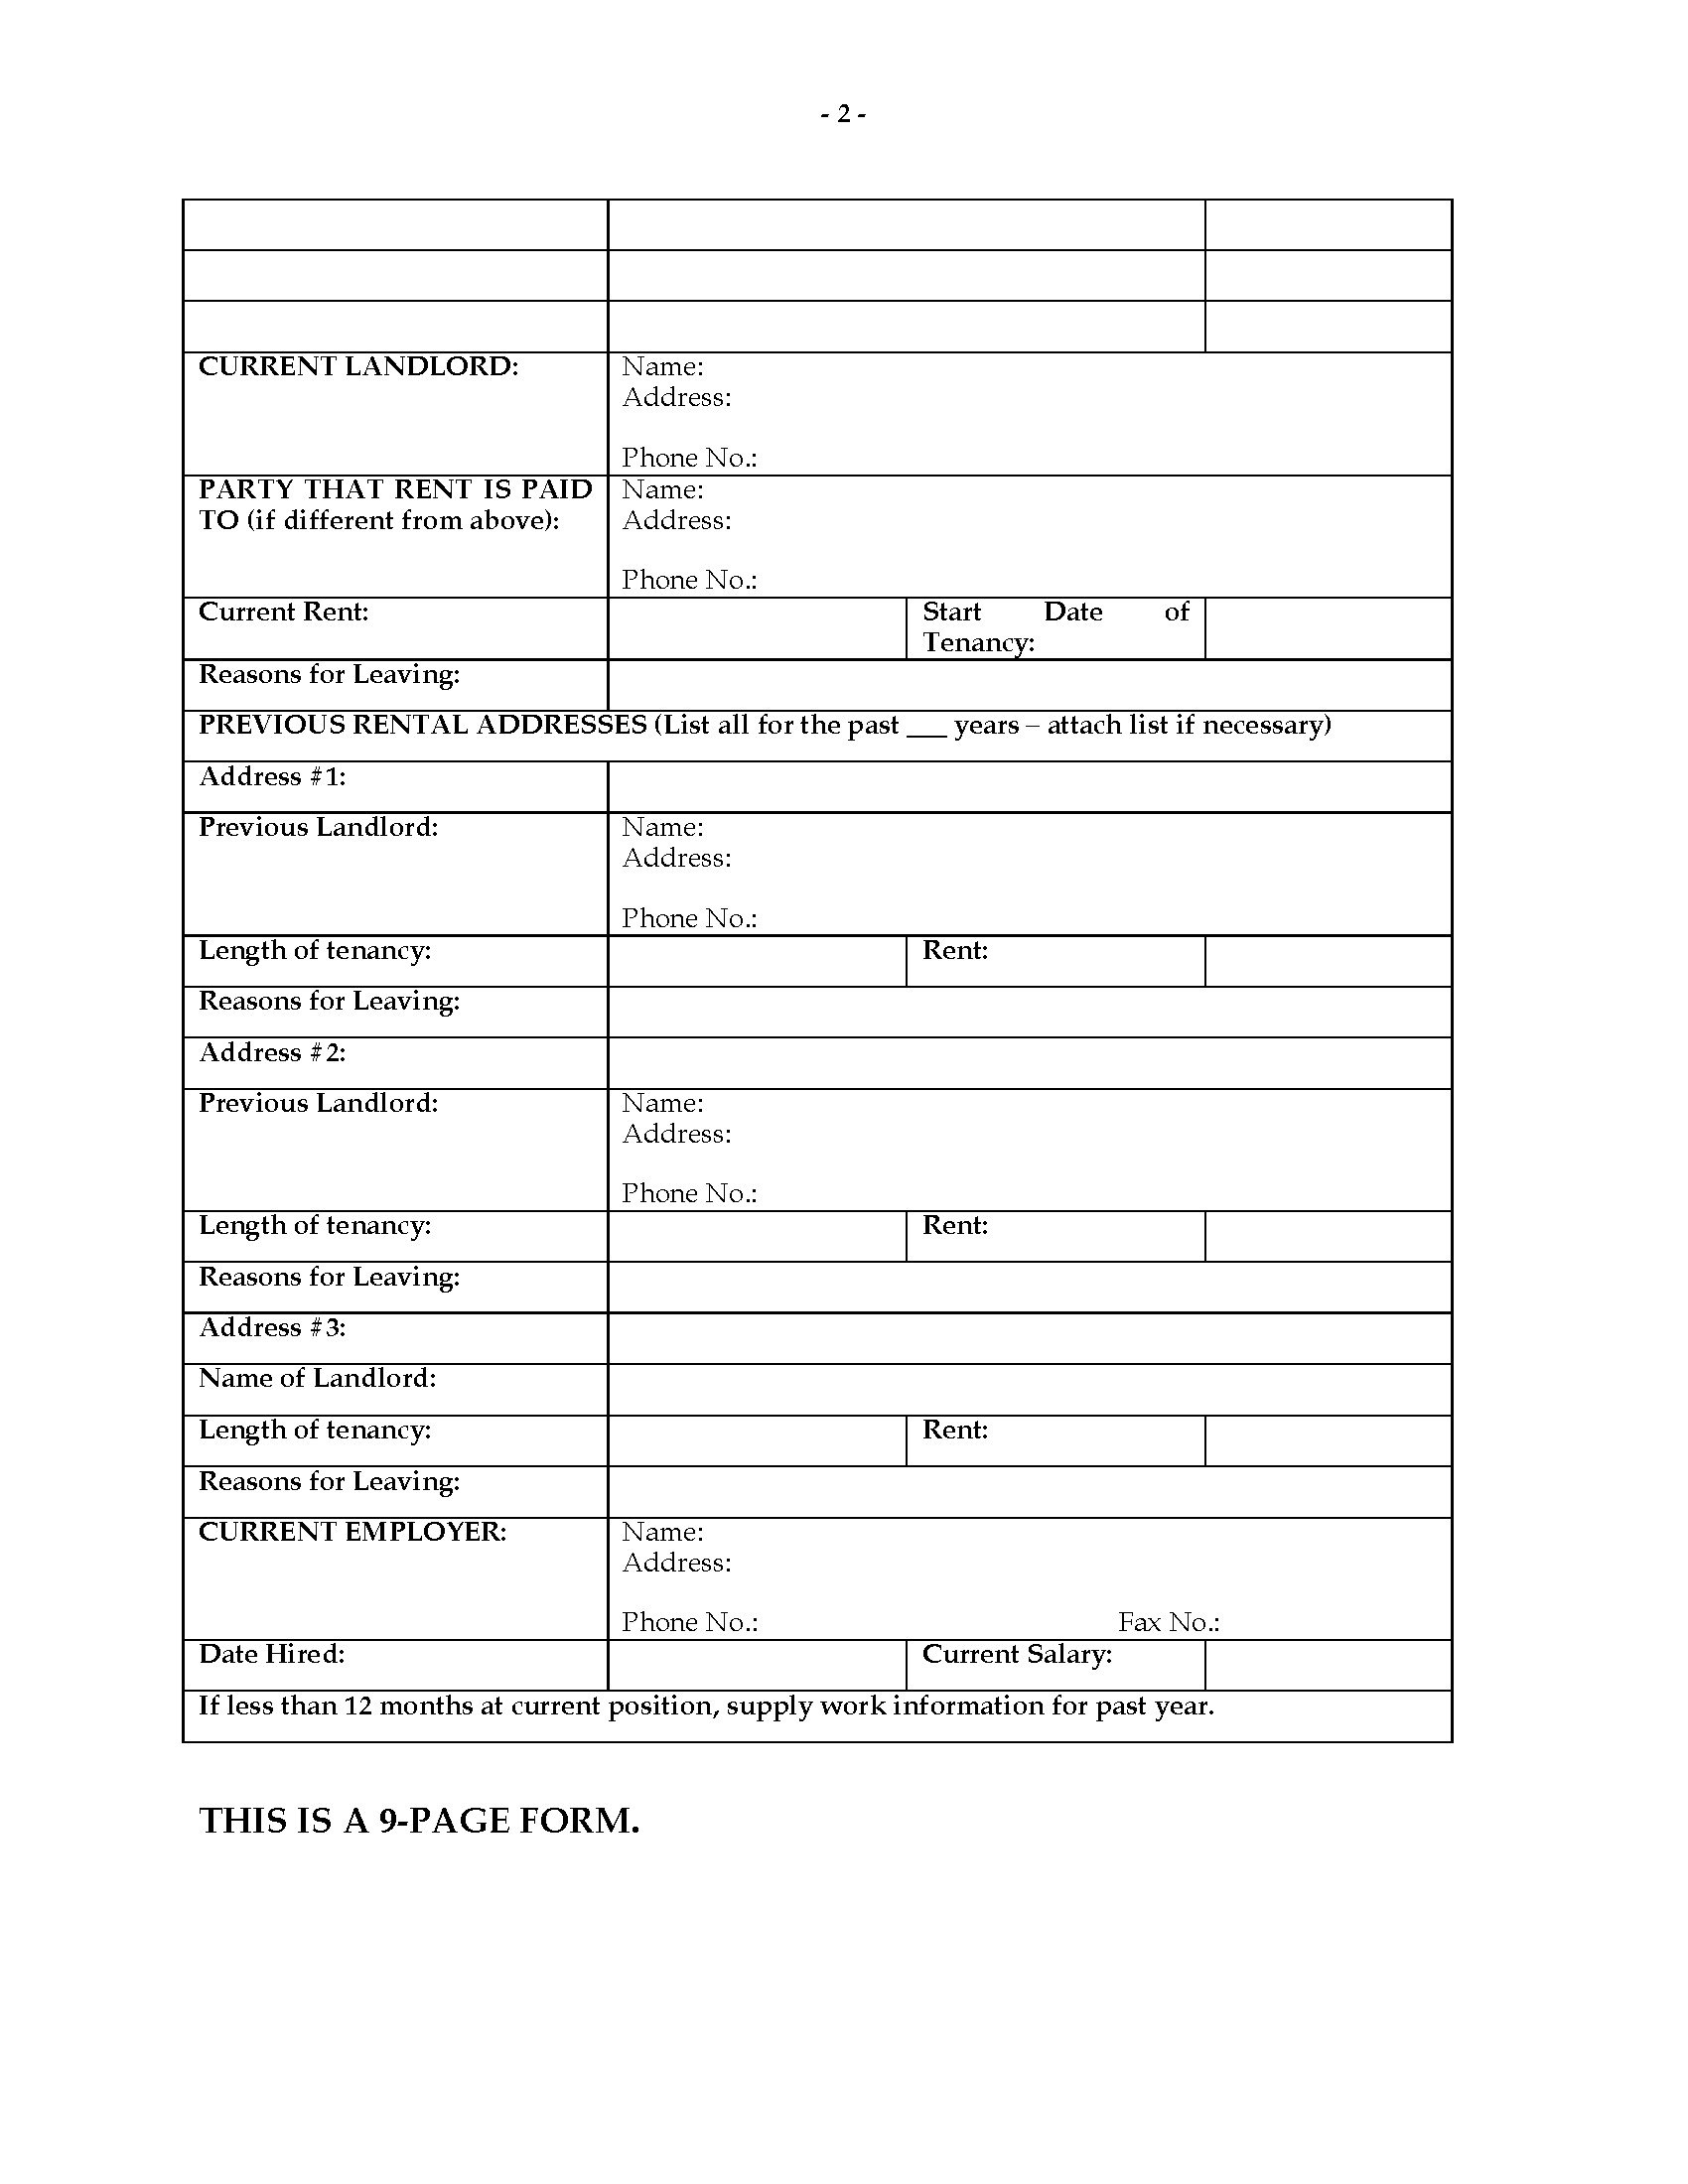 florida-rental-application-form-legal-forms-and-business-templates